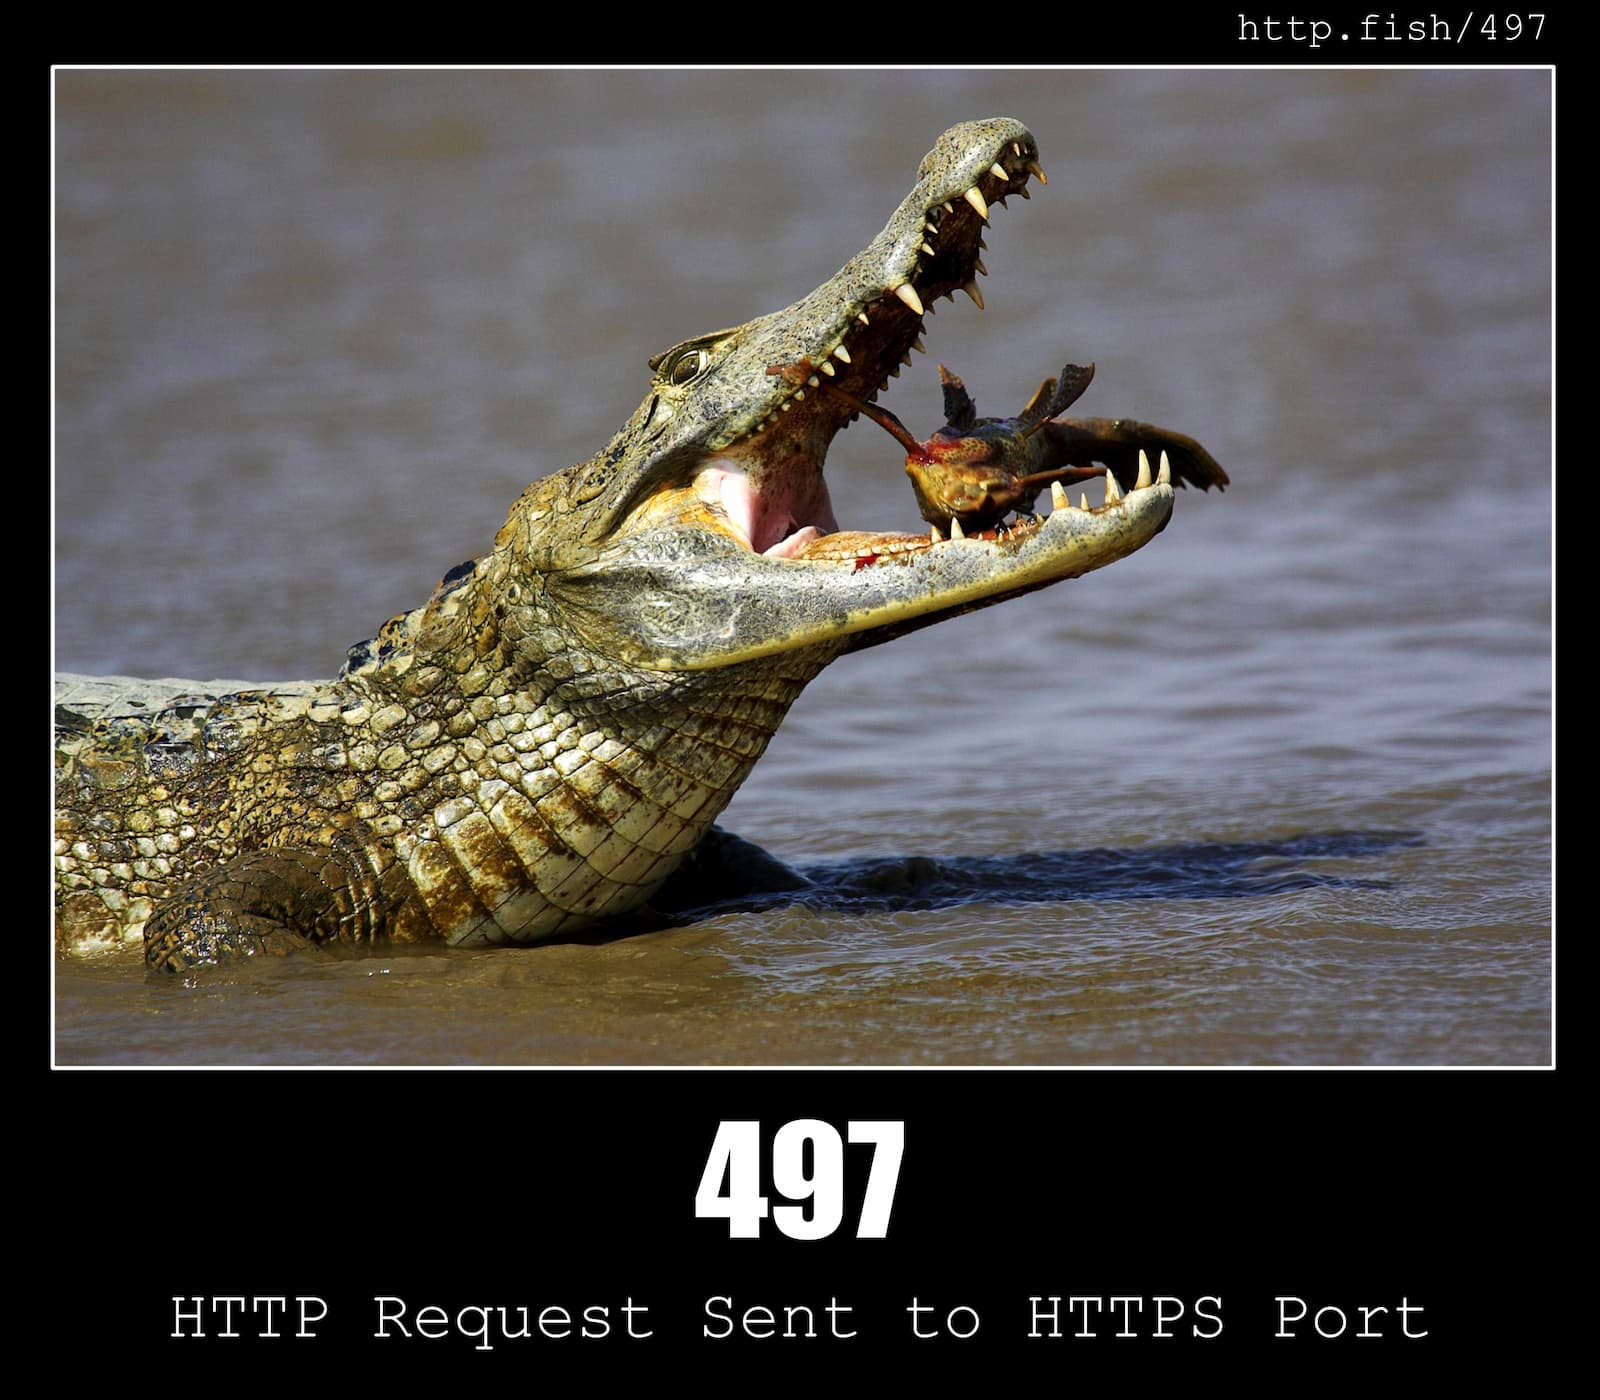 HTTP Status Code 497 HTTP Request Sent to HTTPS Port & Fish